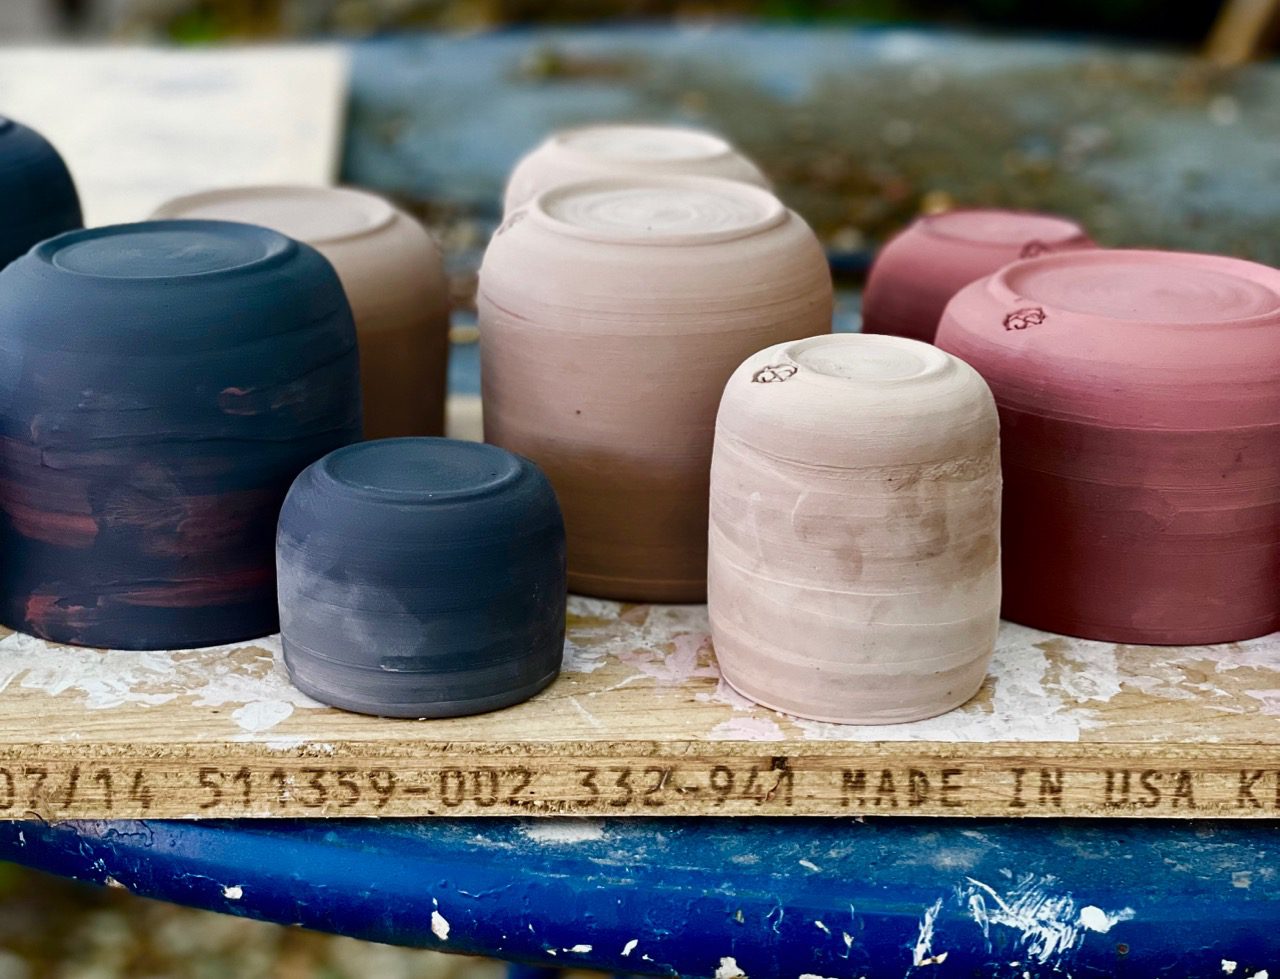 Black, pink, and red porcelain greenware pots upside down and butts-up on a wooden board